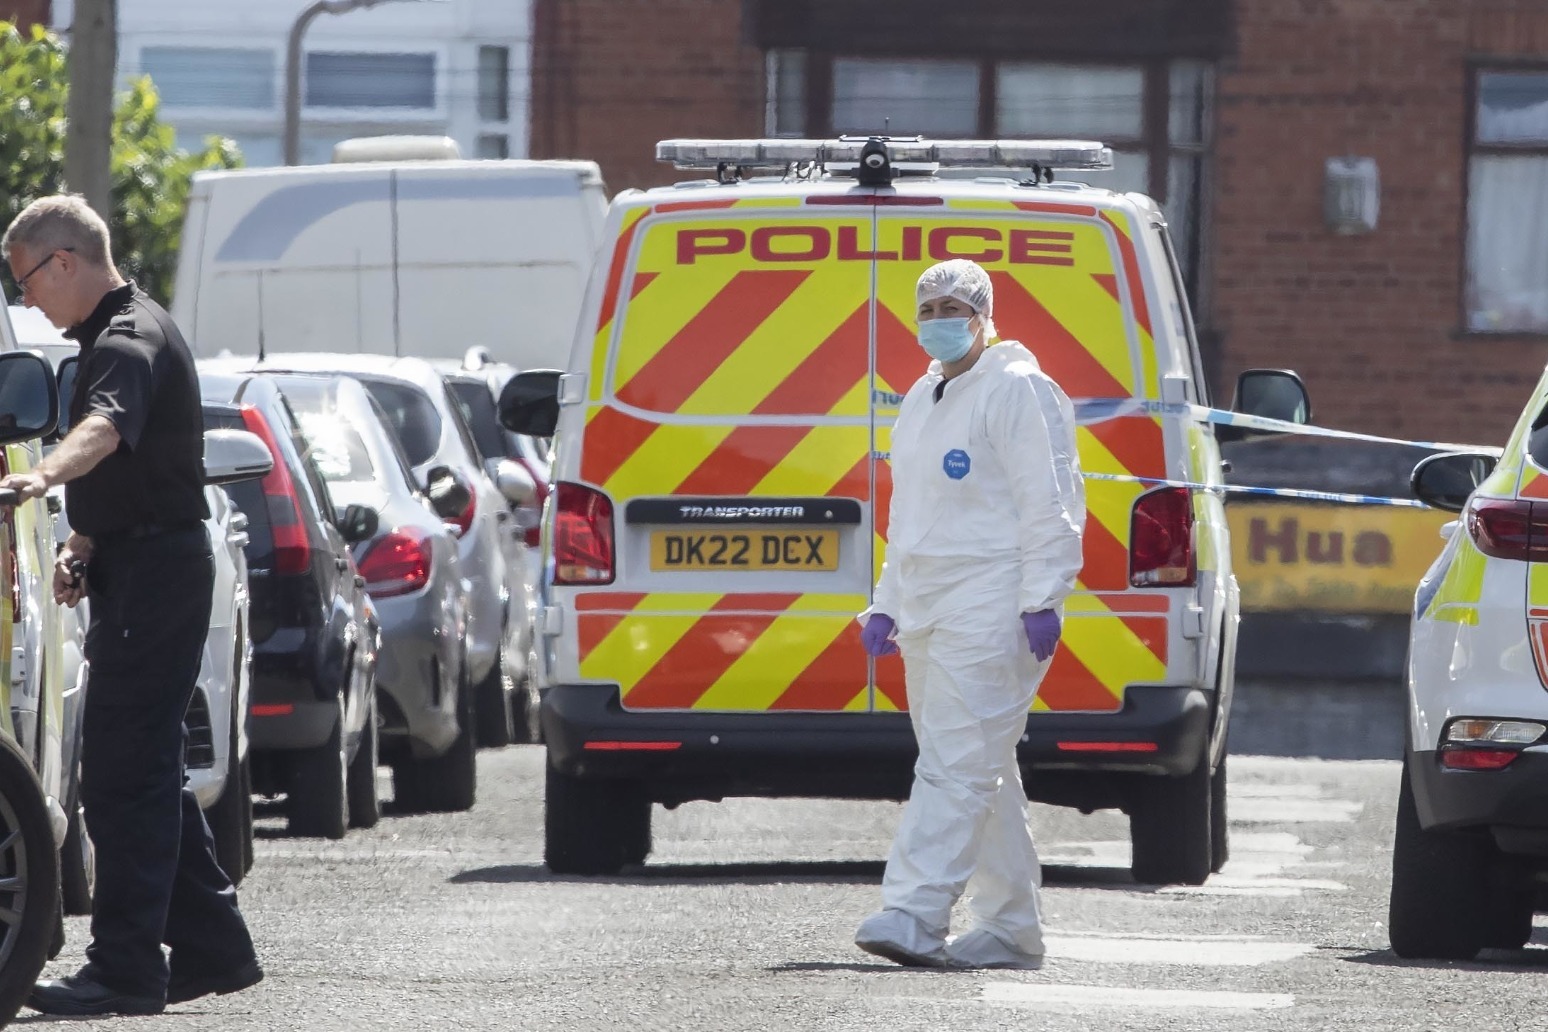 Coroner calls for public to provide information on ‘heinous’ Liverpool shootings 